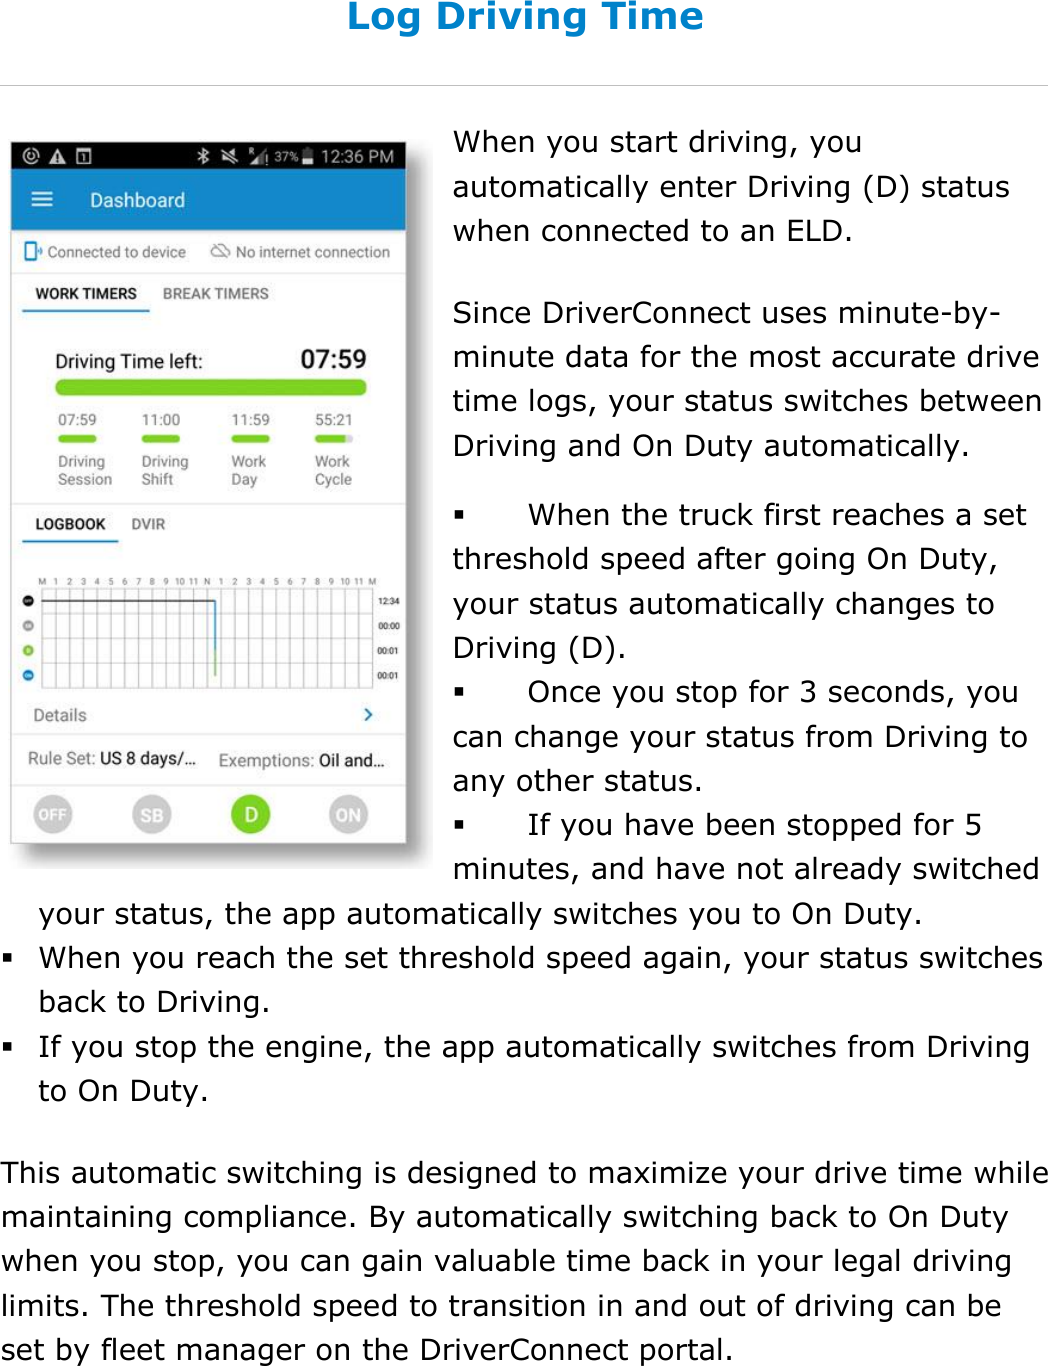 Set My Duty Status DriverConnect User Guide  33 © 2017, Rand McNally, Inc. Log Driving Time When you start driving, you automatically enter Driving (D) status when connected to an ELD. Since DriverConnect uses minute-by-minute data for the most accurate drive time logs, your status switches between Driving and On Duty automatically.  When the truck first reaches a set threshold speed after going On Duty, your status automatically changes to Driving (D).   Once you stop for 3 seconds, you can change your status from Driving to any other status.  If you have been stopped for 5 minutes, and have not already switched your status, the app automatically switches you to On Duty.  When you reach the set threshold speed again, your status switches back to Driving.  If you stop the engine, the app automatically switches from Driving to On Duty. This automatic switching is designed to maximize your drive time while maintaining compliance. By automatically switching back to On Duty when you stop, you can gain valuable time back in your legal driving limits. The threshold speed to transition in and out of driving can be set by fleet manager on the DriverConnect portal.    